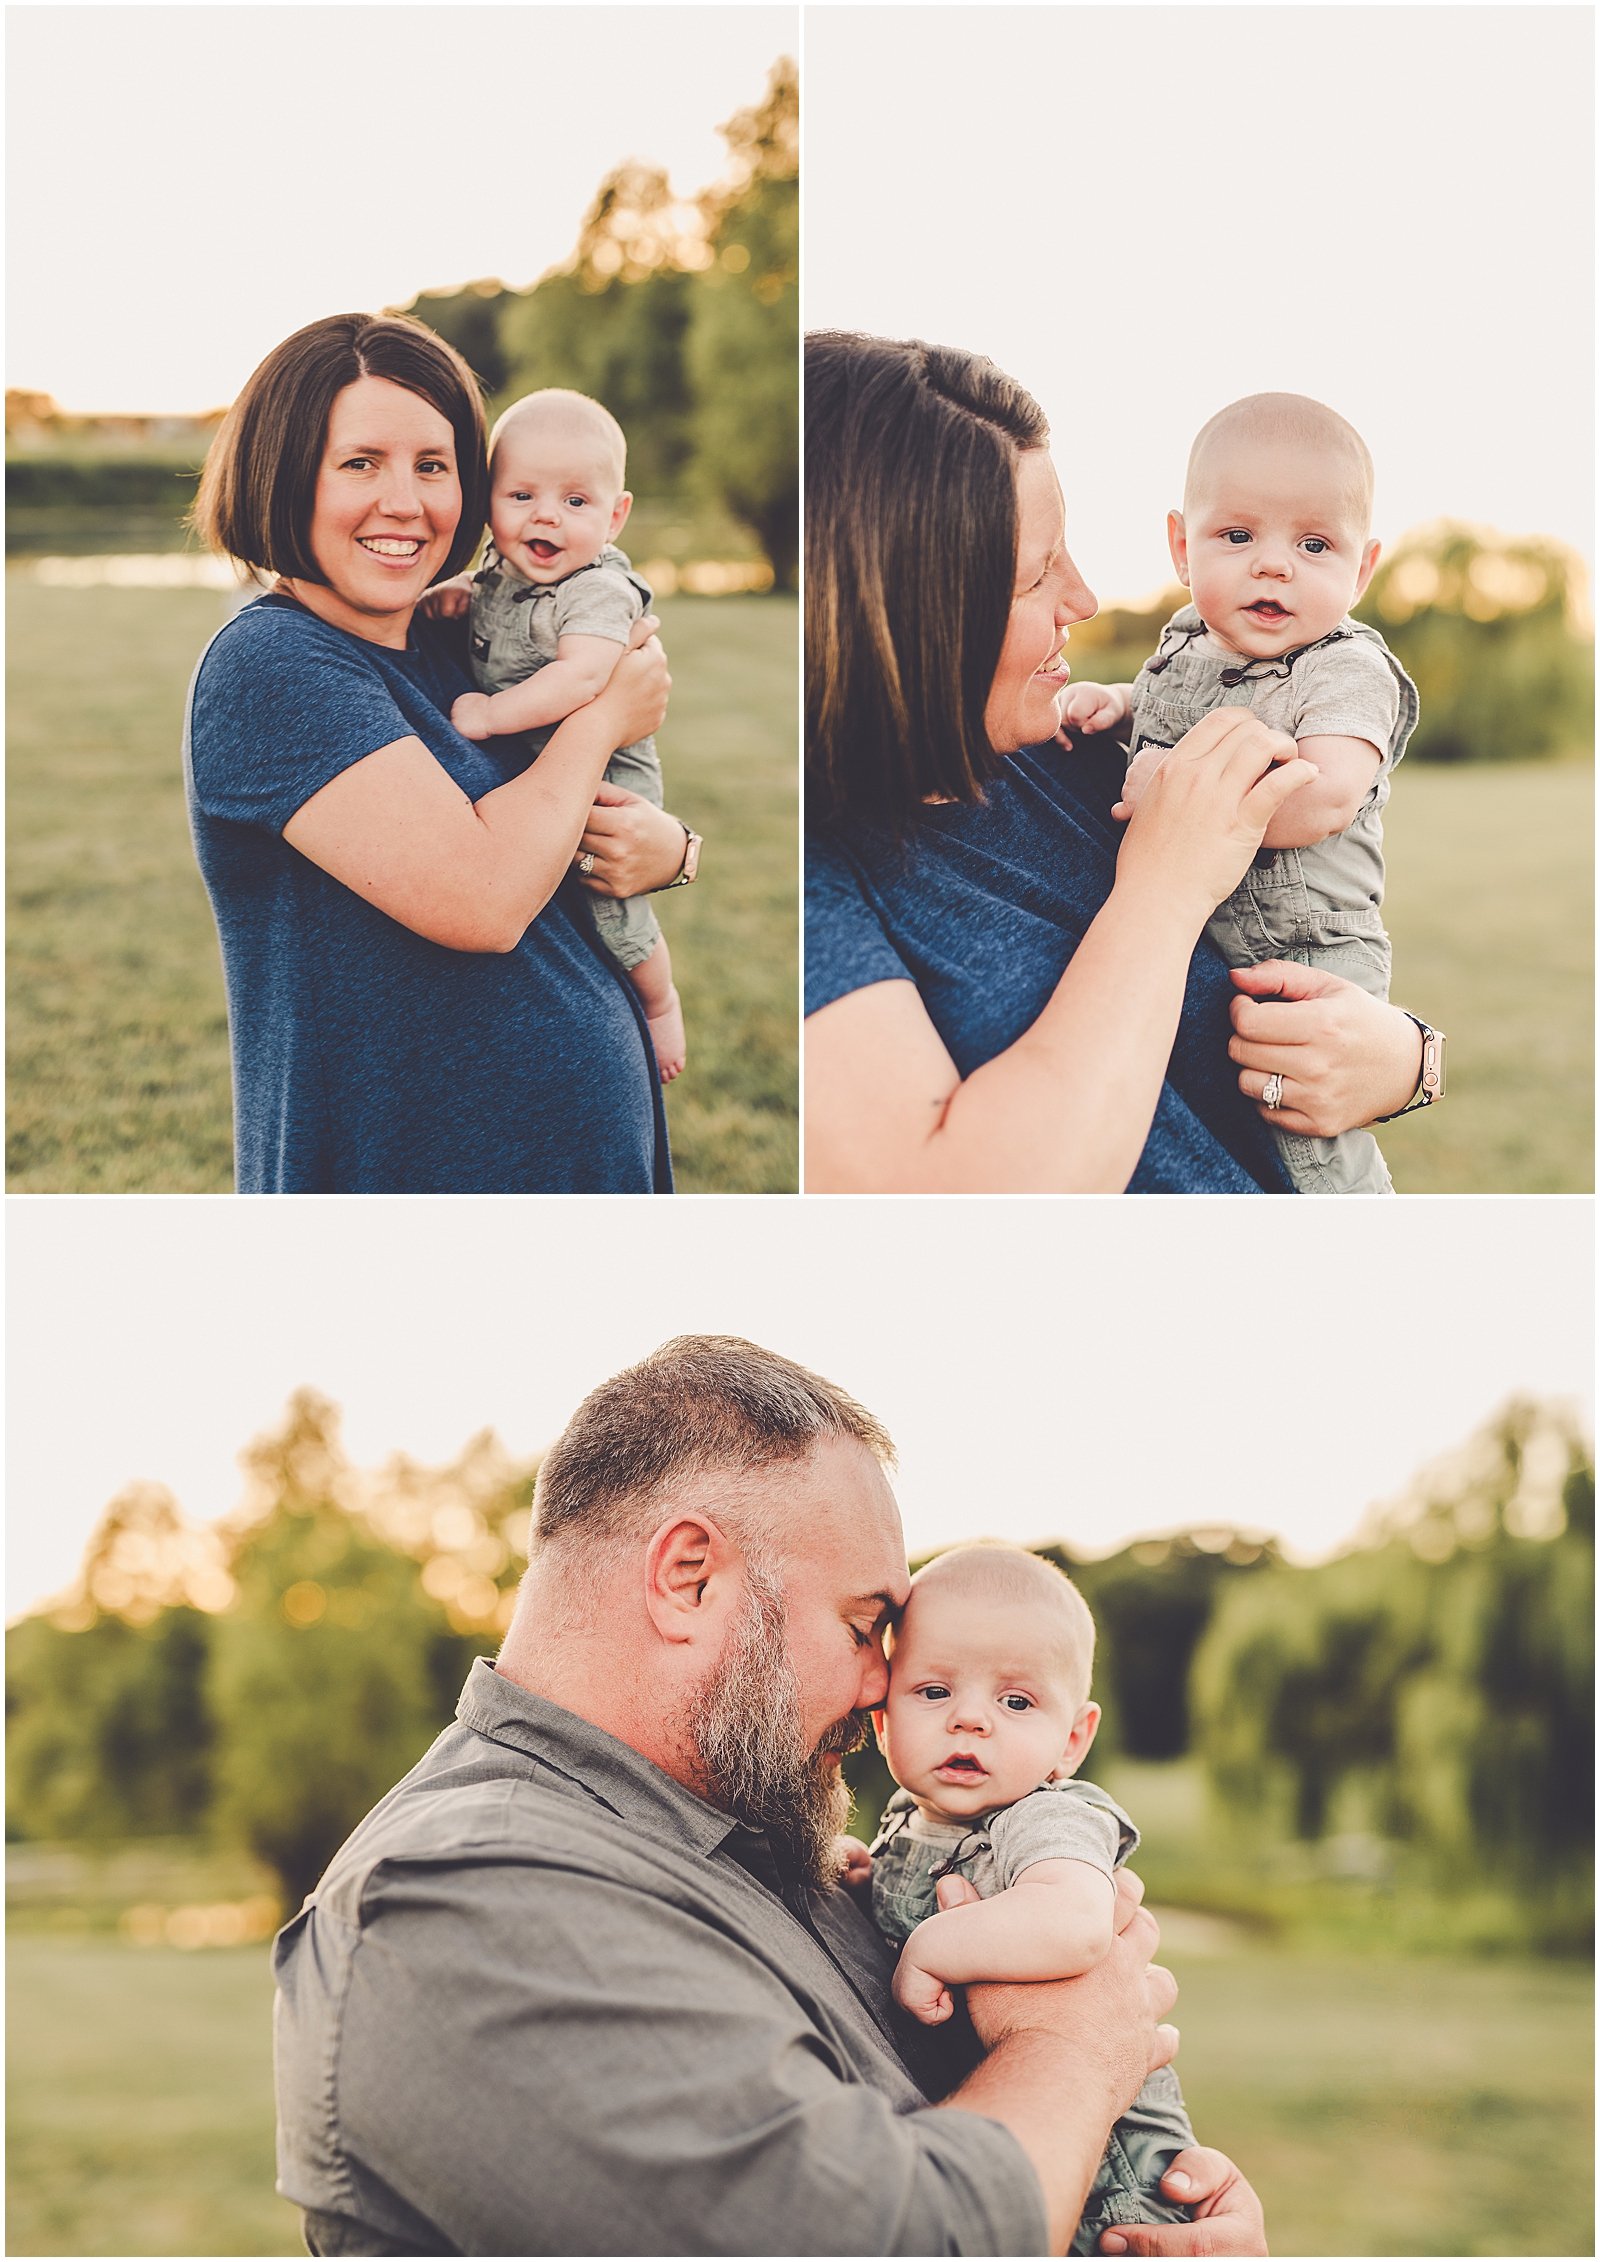 Central Illinois sunset family & milestone photography for the Evans family with Bourbonnais family photographer Kara Evans Photographer.